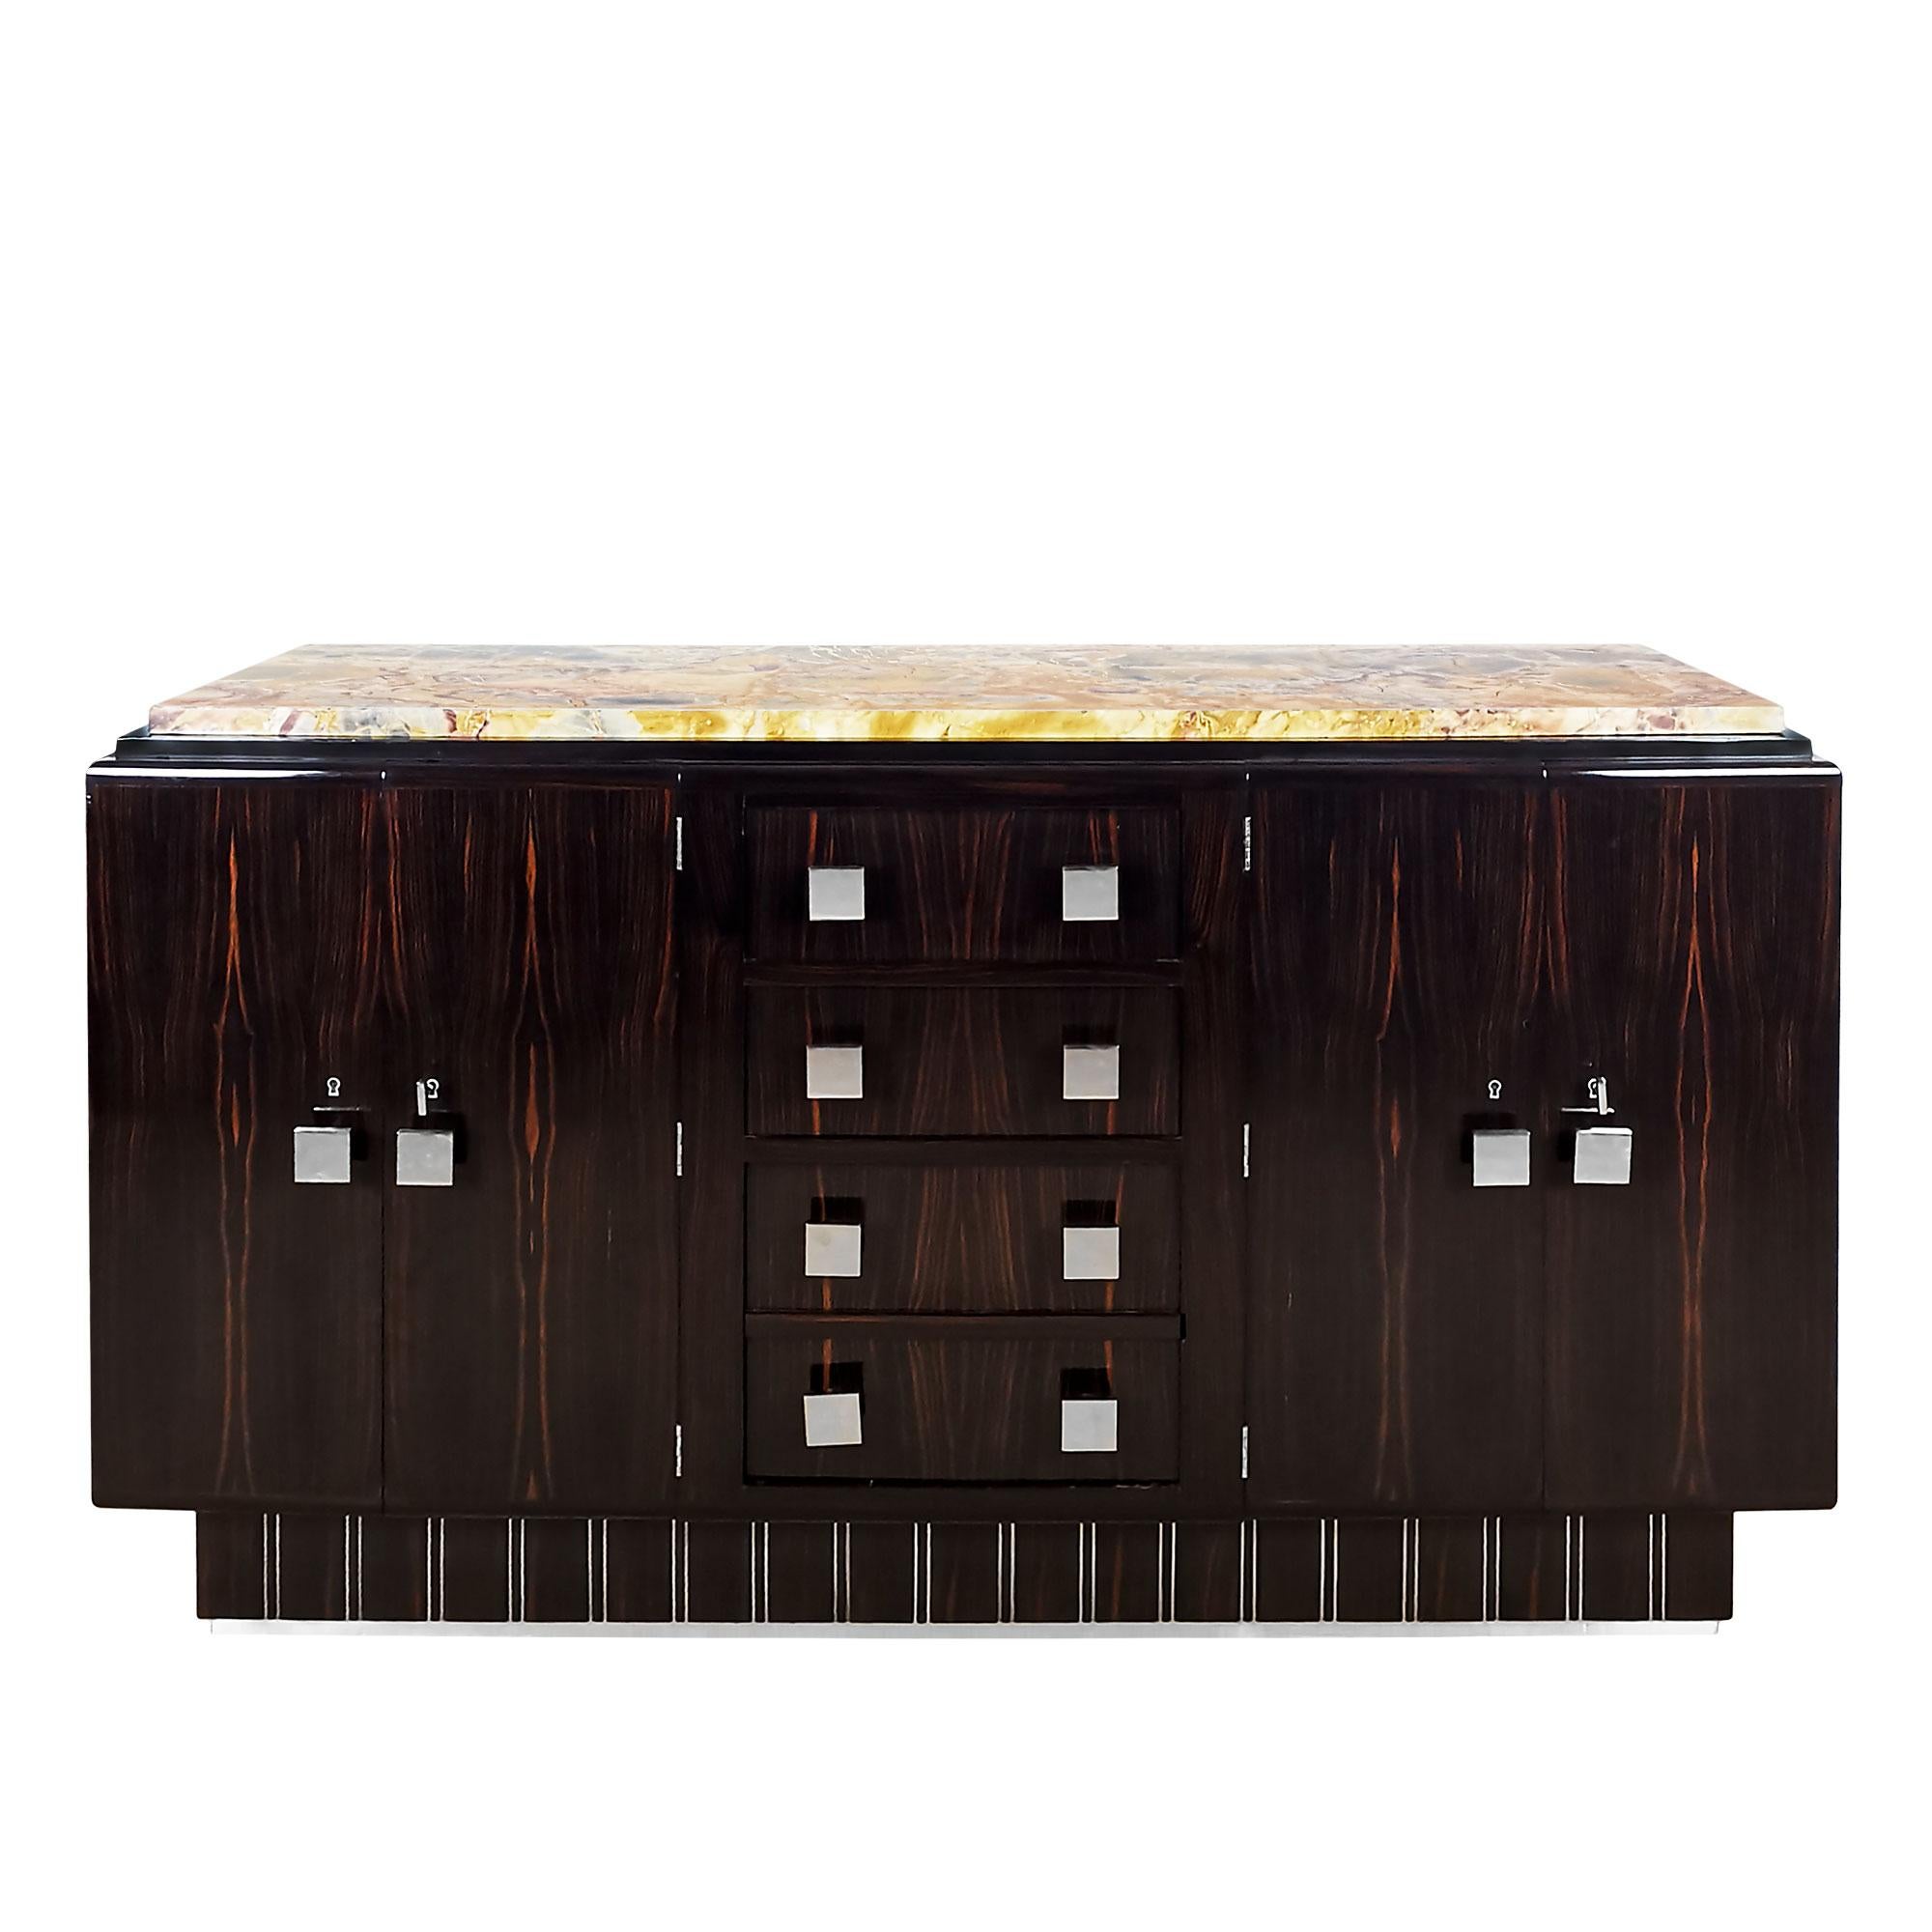 Small 4 doors and 4 drawers sideboard in solid wood veneered with Macassar ebony. Ebony and polished aluminum base, doors opening onto a mahogany interior (height-adjustable shelves), multicoloured marble top.
Handles, keys and hardware in